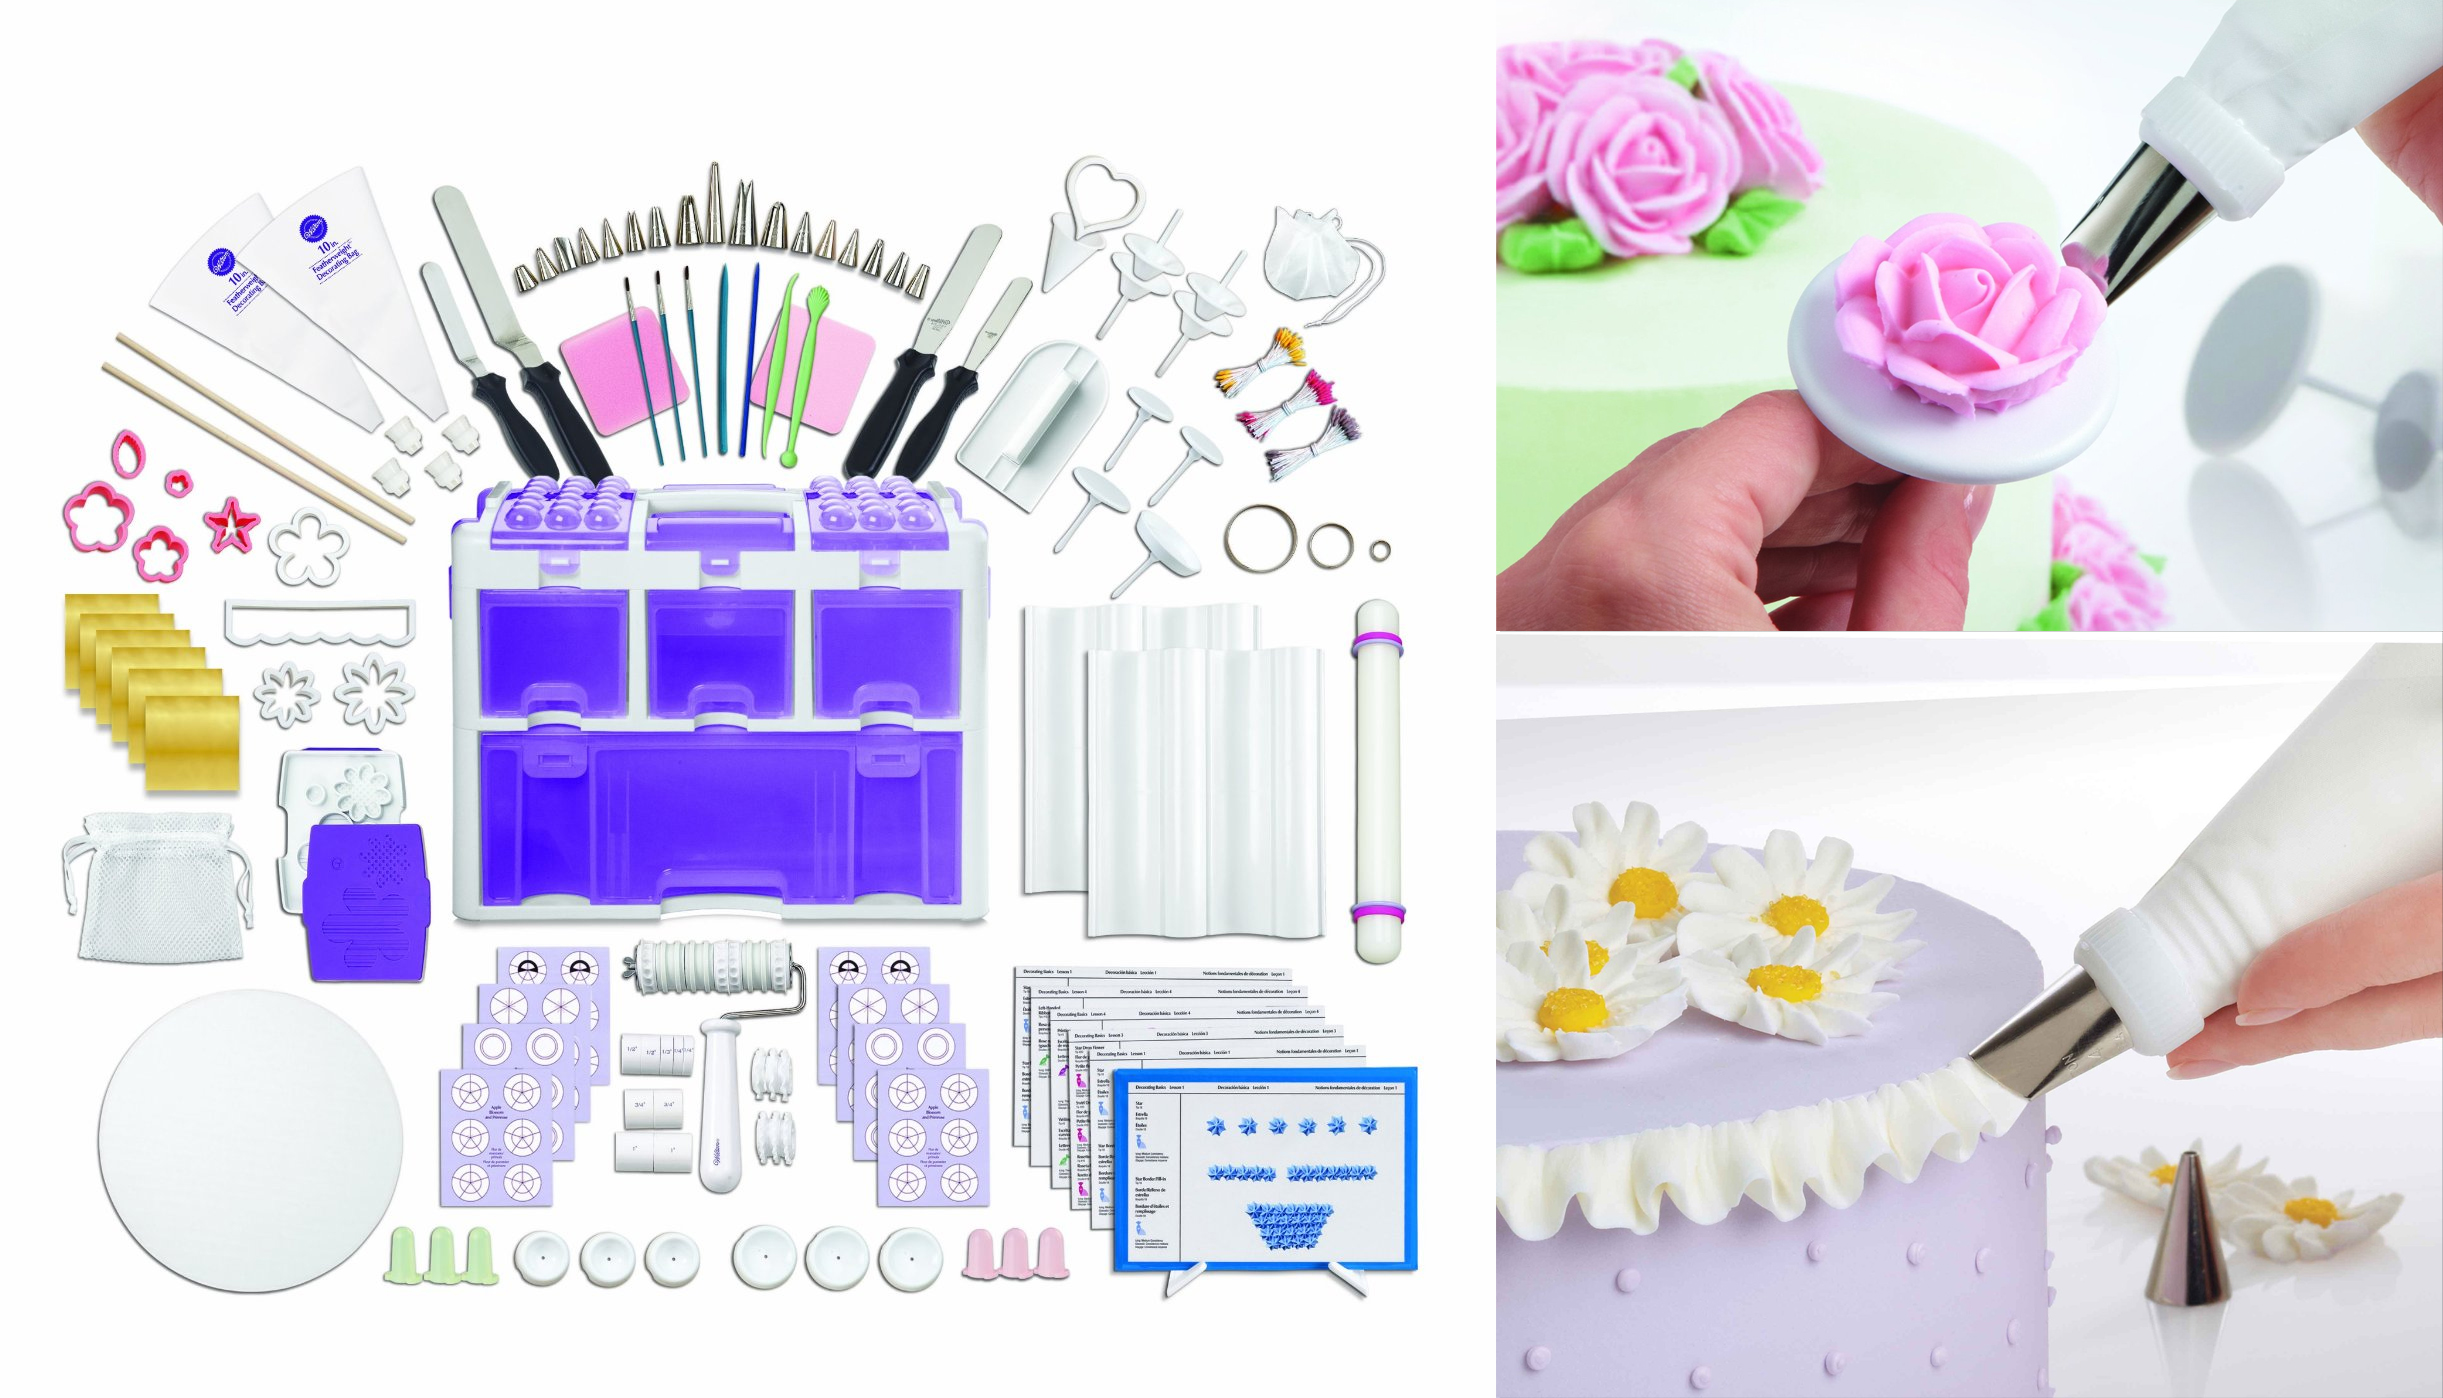 best gifts 2016 for bakers Professional Cake Decorating Set